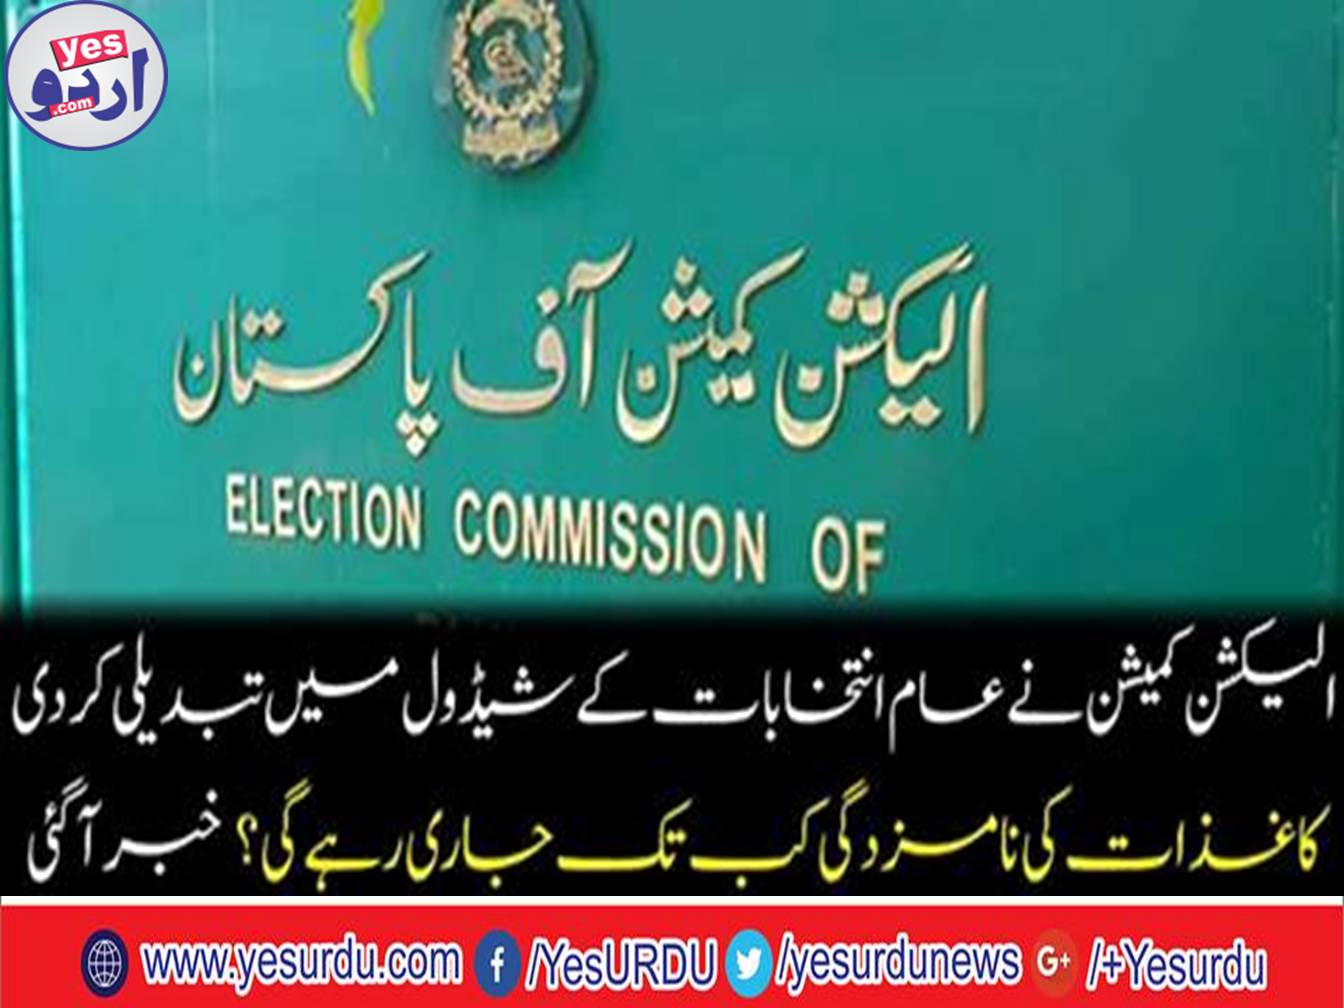 The Election Commission made a change in schedule for general election